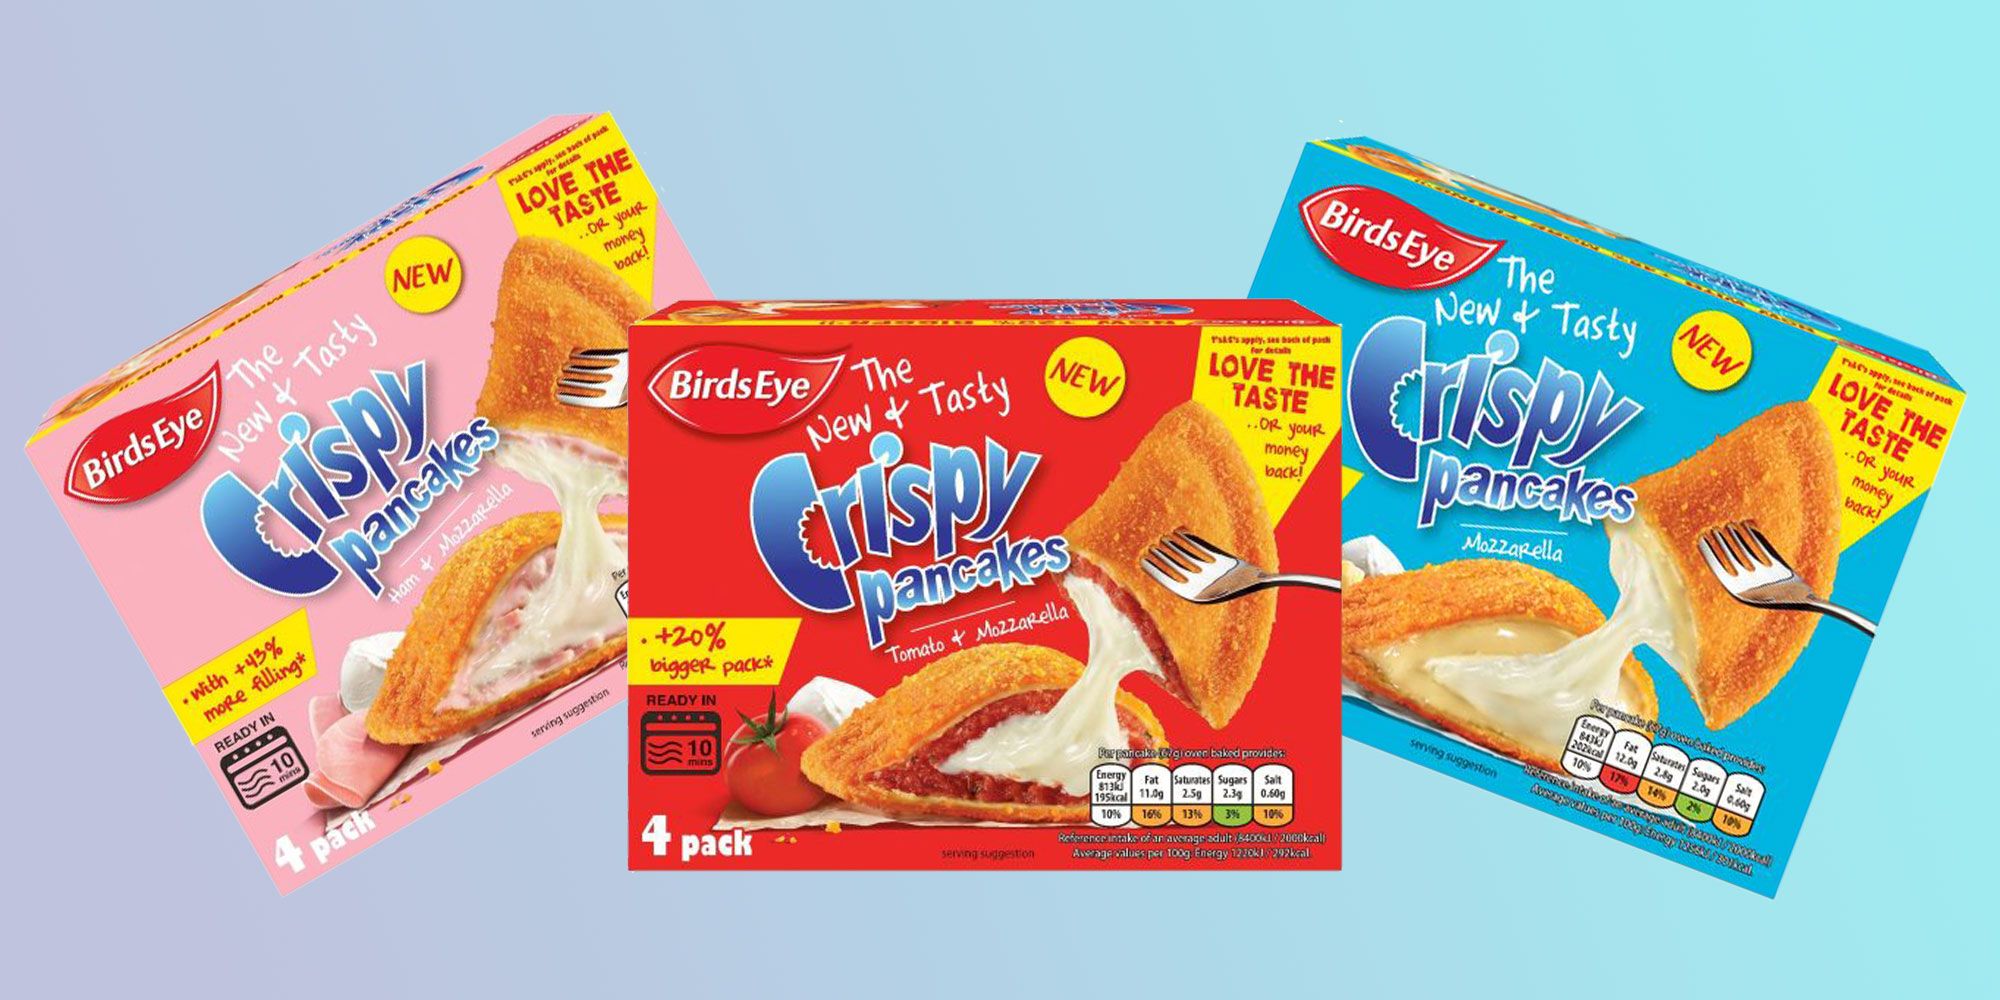 Birds Eye is bringing back your fave Findus Crispy Pancakes for Pancake Day